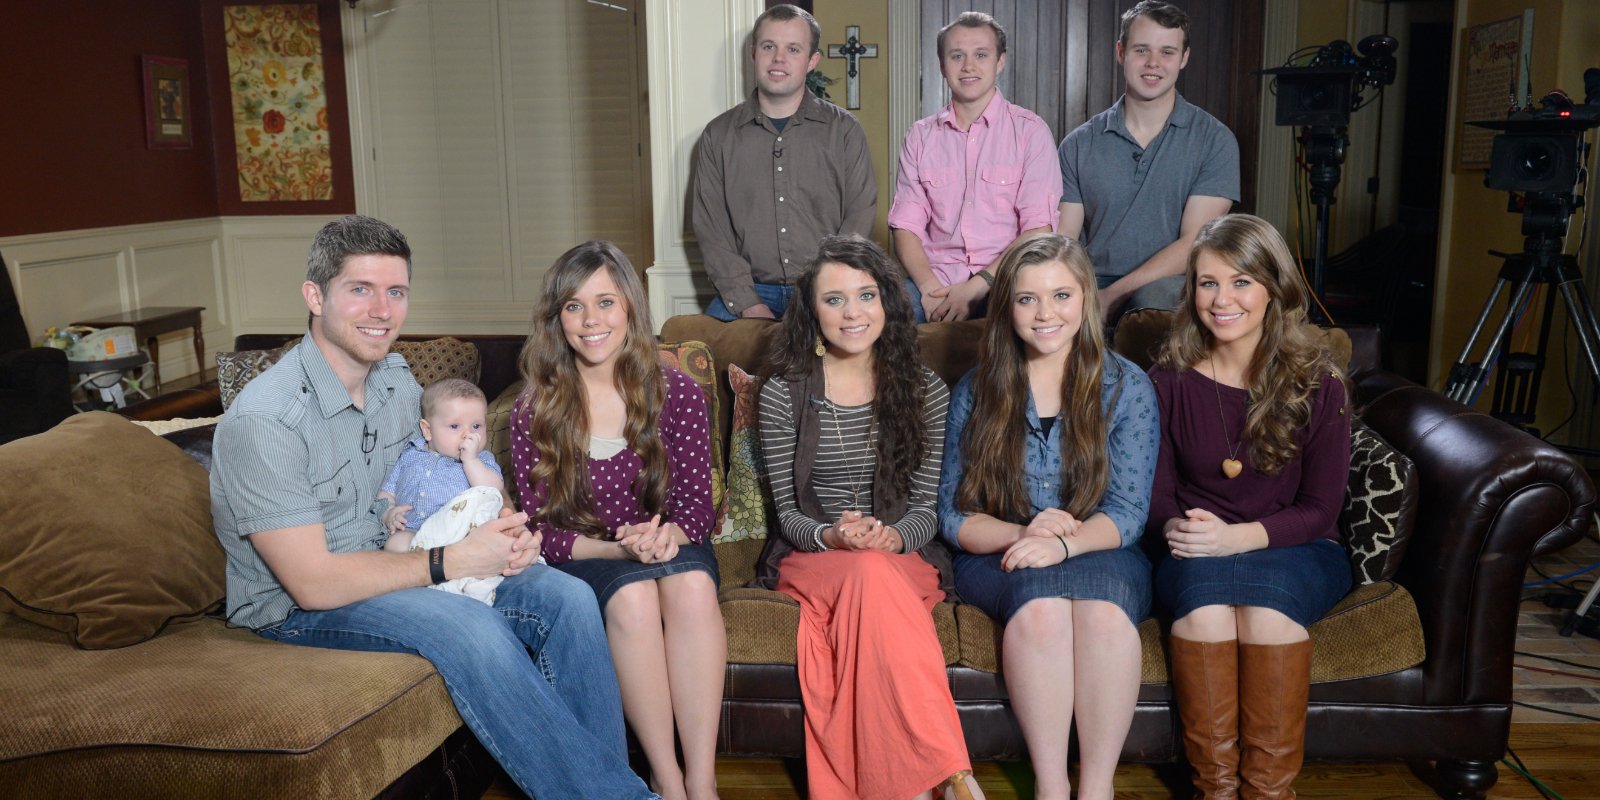 Jinger Duggar Vuolo Reveals ‘Earth-Shaking Realization’ in Explosive New Book ‘Becoming Free Indeed’ Where She Discusses ‘Harmful’ Ideology of Her Youth